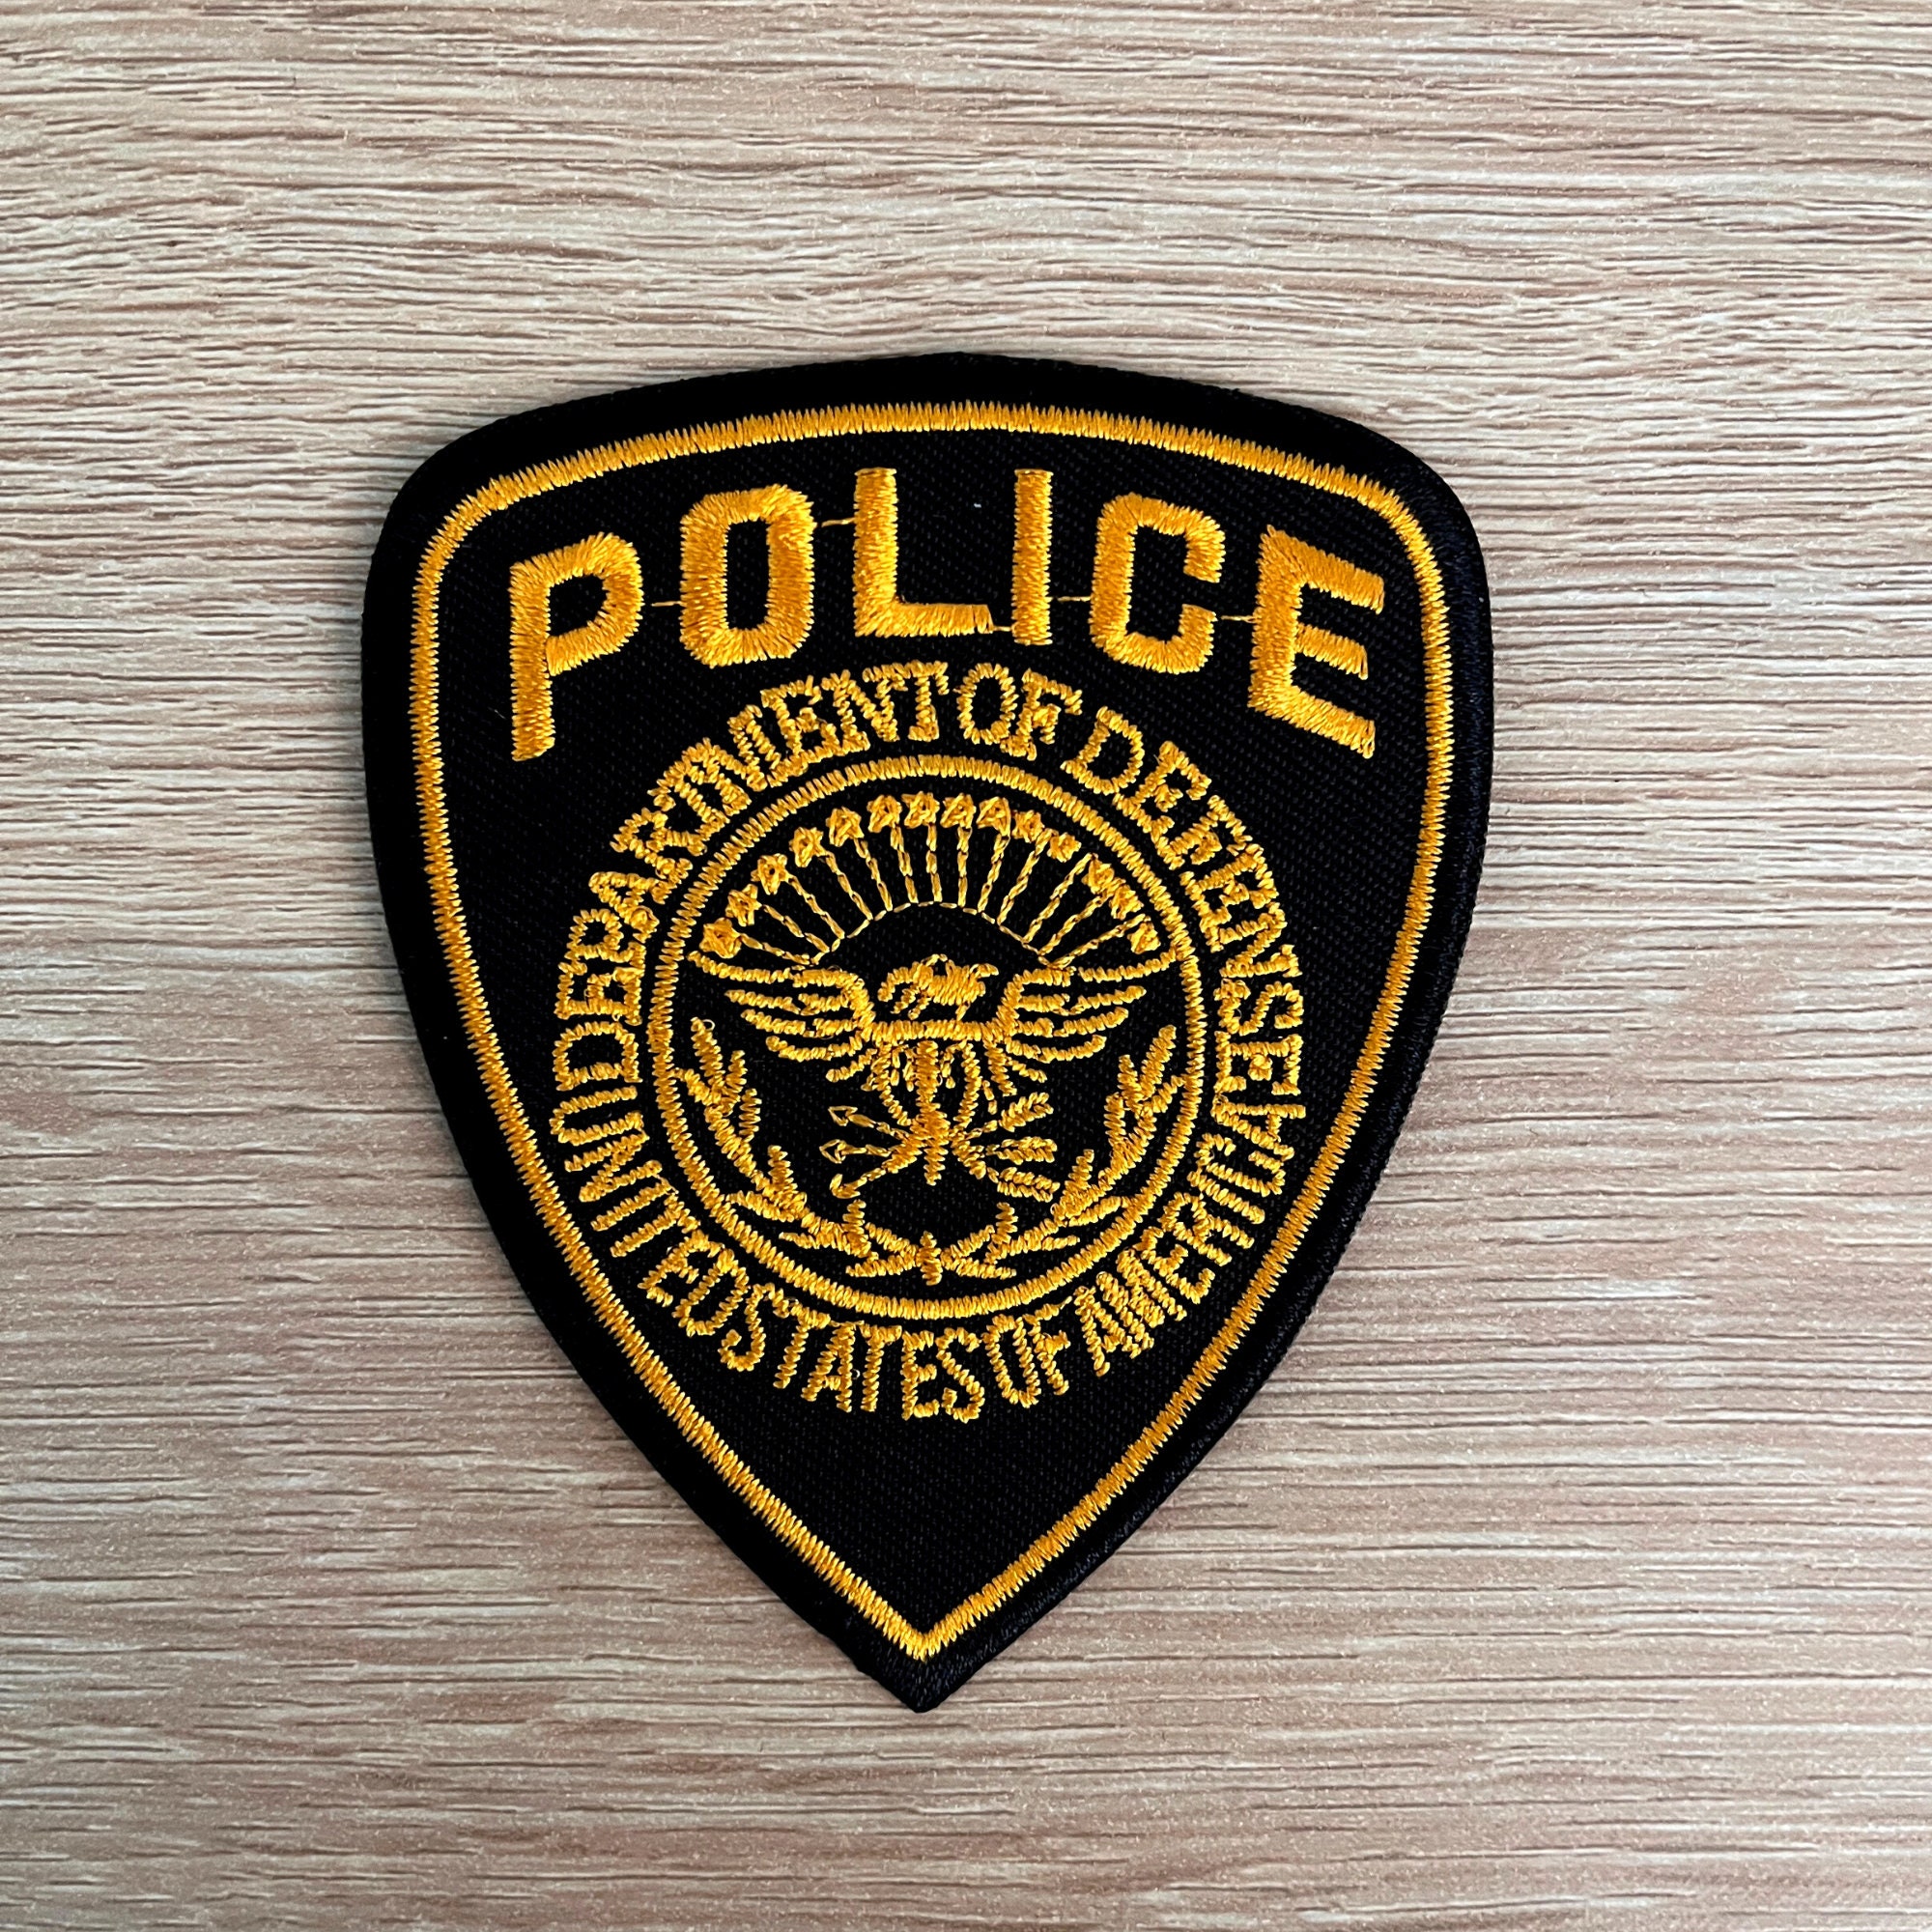 Police Back Patch, Embroidered, Gold/Black, 10 x 4 - Patch Supply